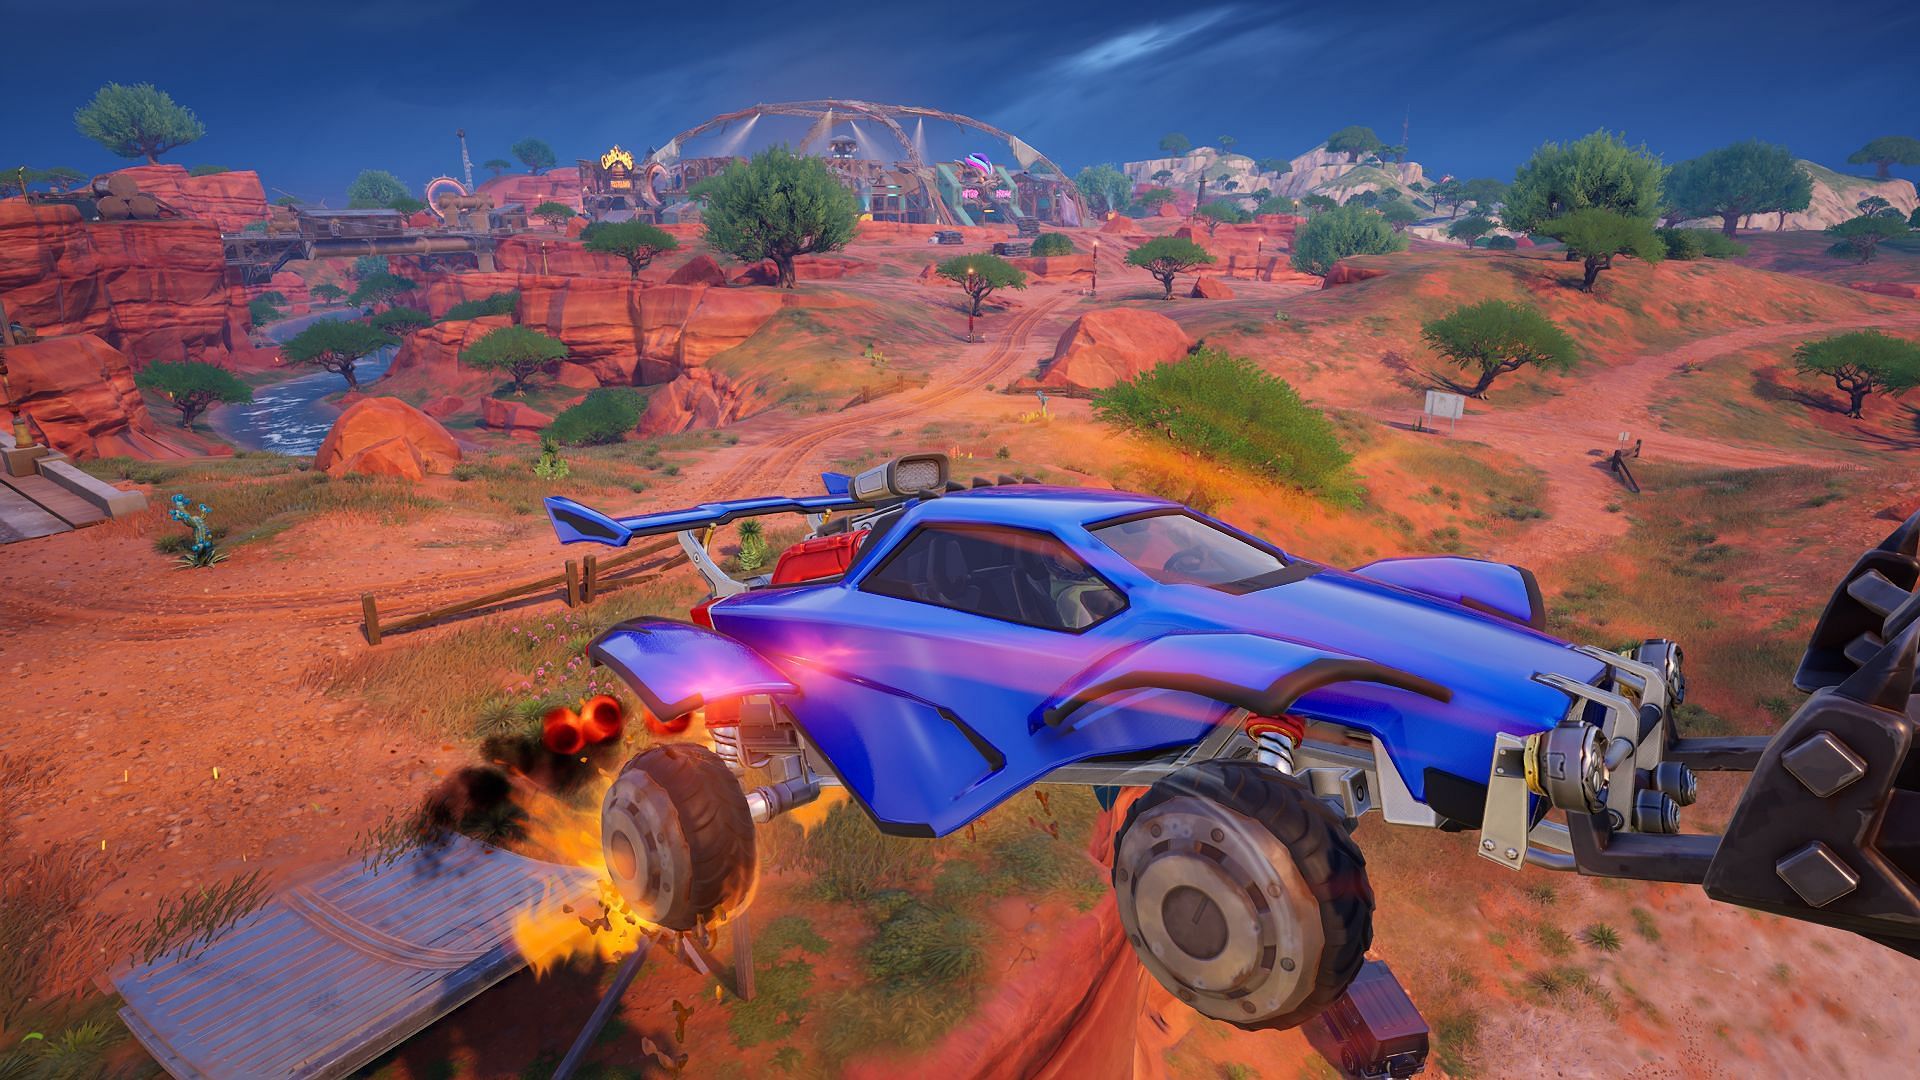 Tesla Cybertruck could be added soon to Fortnite (Image via Epic Games)